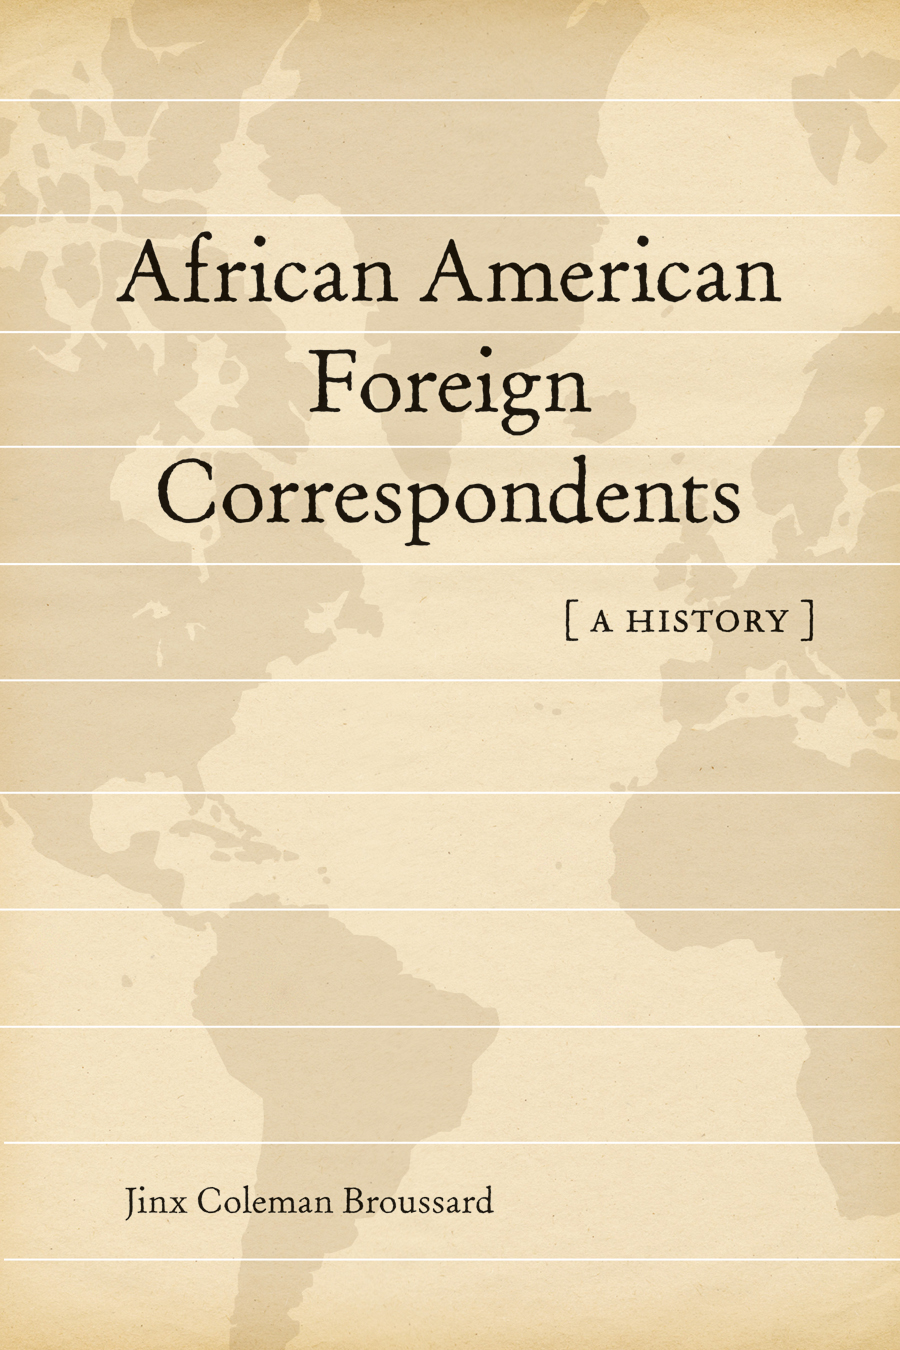 "African American Foreign Correspondents: A History" book cover 